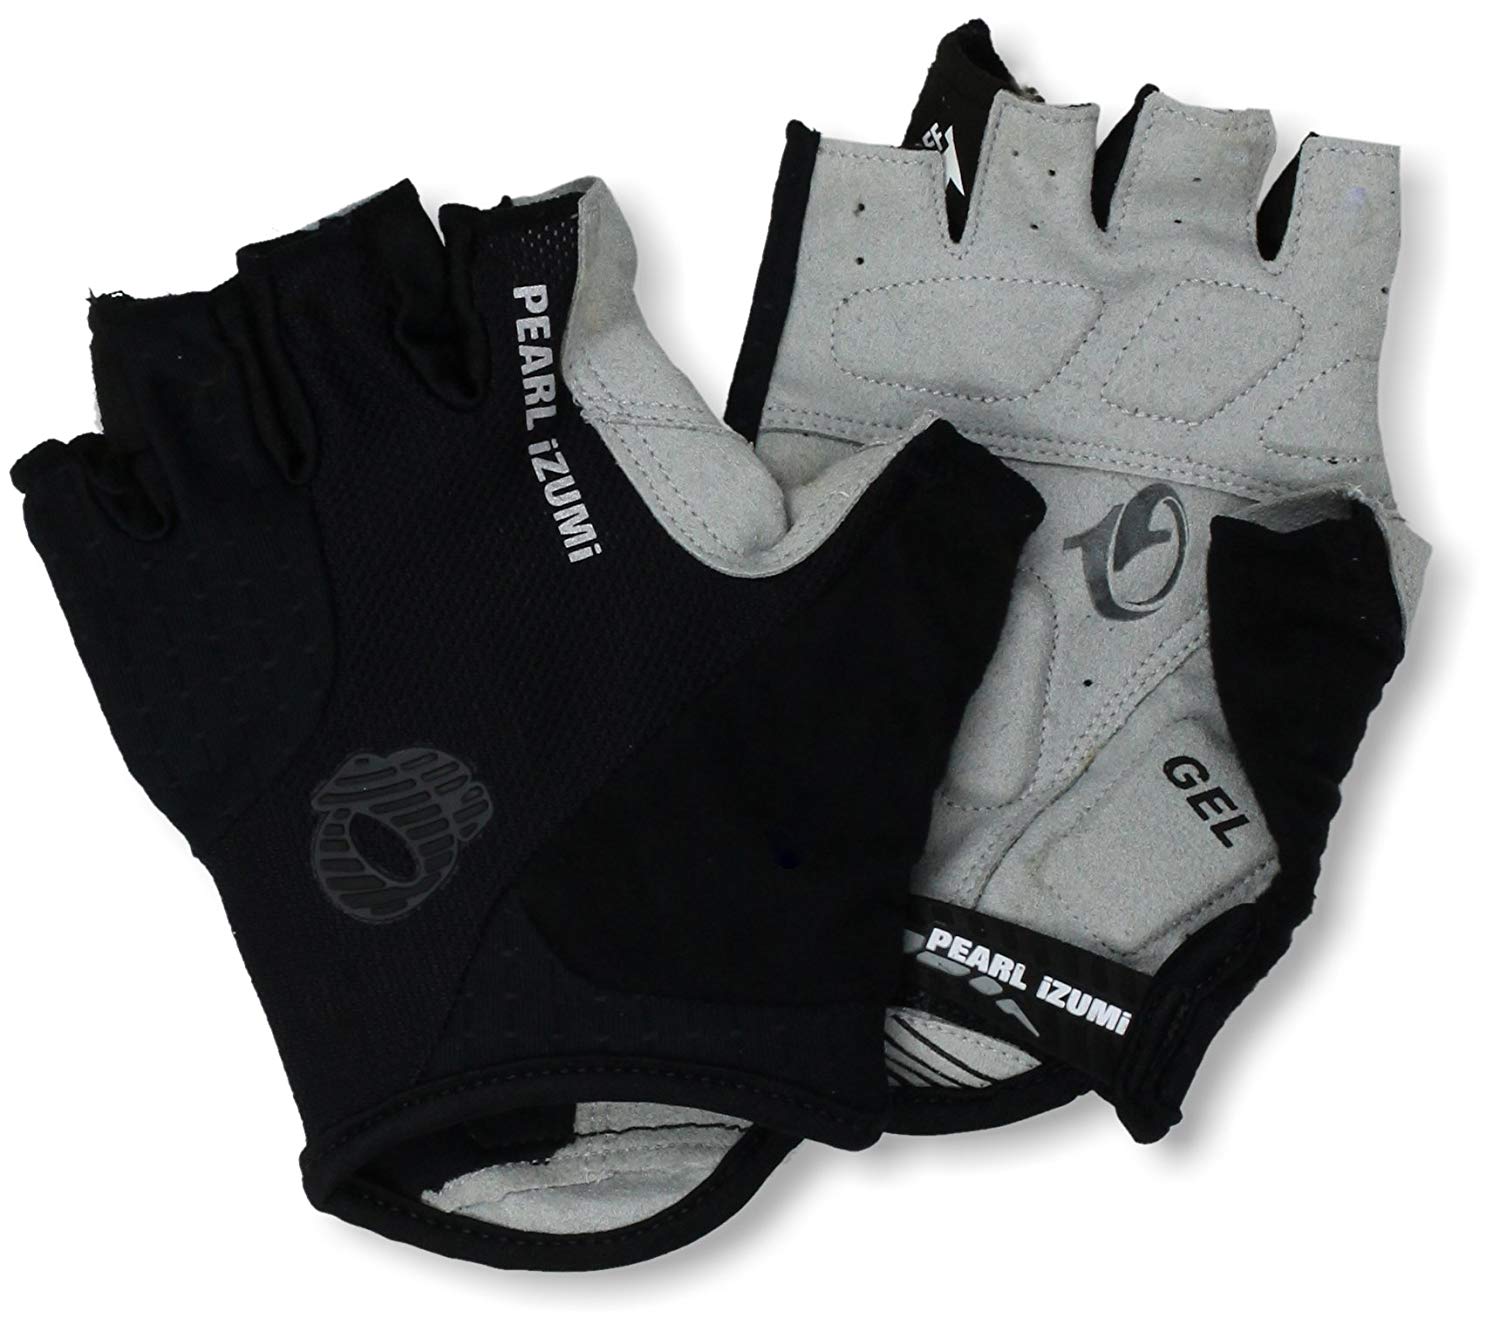 What’s The Best Cycling Gloves in The Market? 9